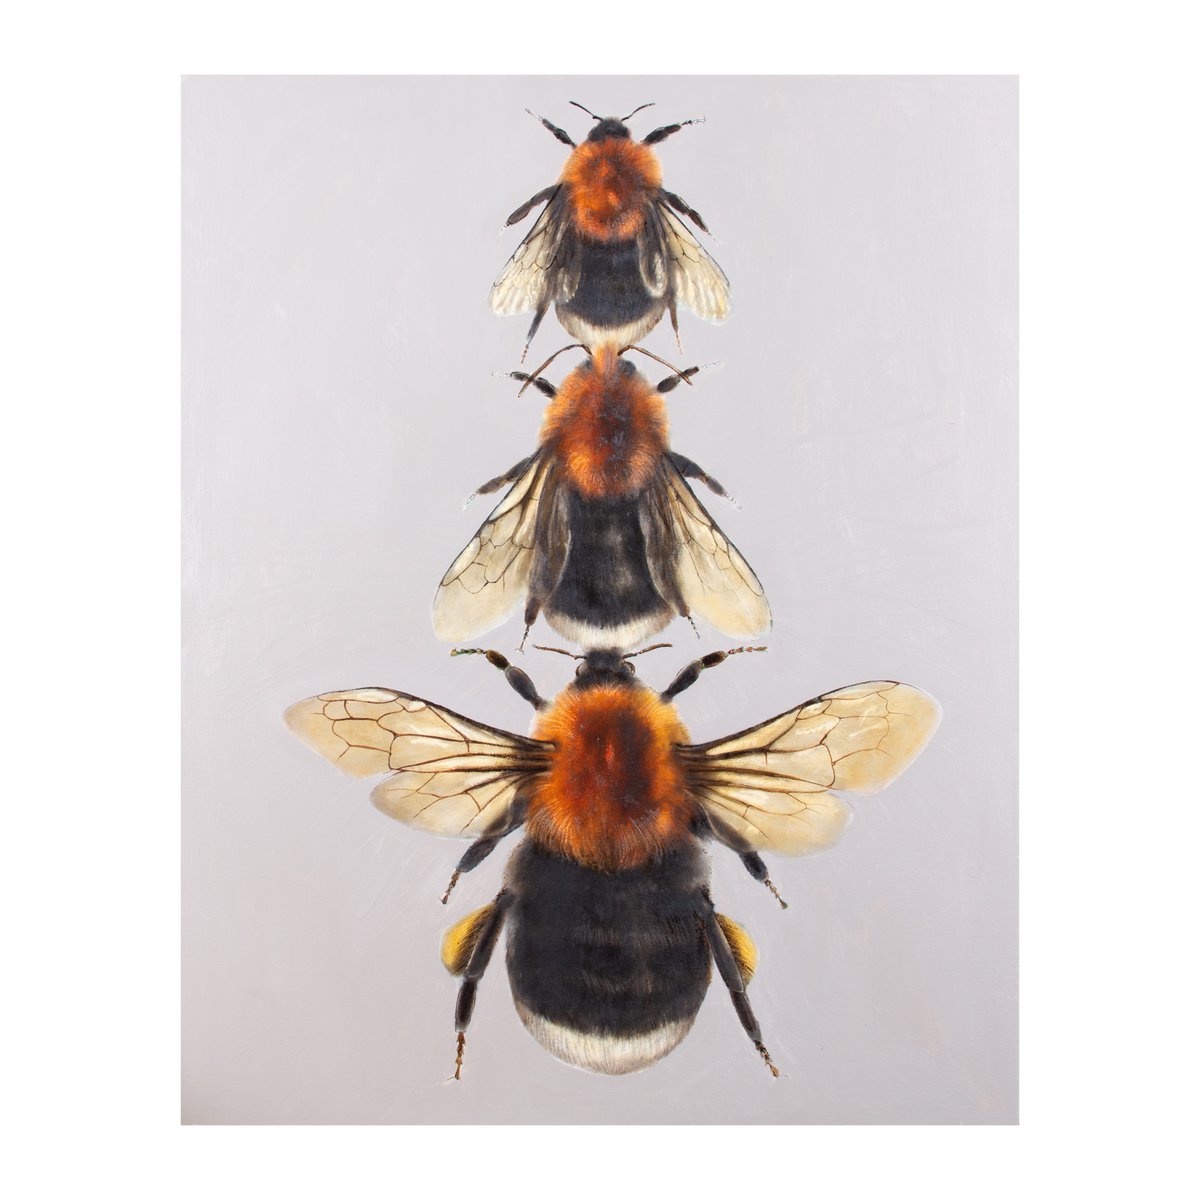 Tree Bees, oil on canvas, 108cm x 93cm by Andrew Tyzack
108 Fine Art 16 Cold Bath Road Harrogate HG2 0NA April 22nd-May 26th 108fineart.com #bumblebees #beekeeping #beeart #bees #beepic #bombus #artist #tyzack #huguenots #Harrogate #yorkshire #coldbathroad #british